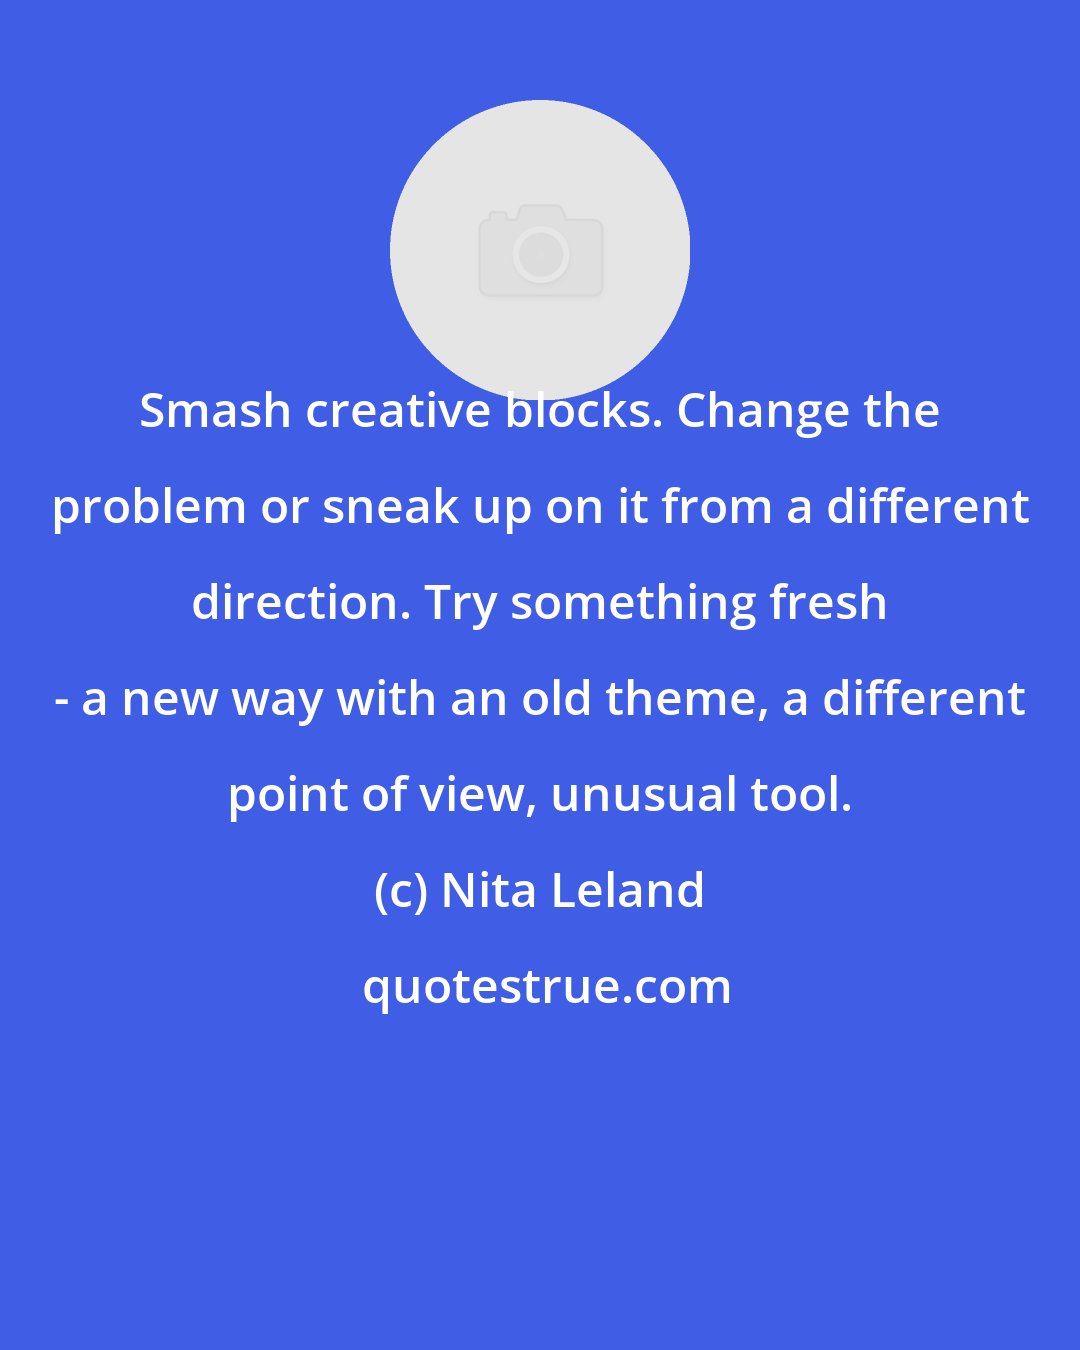 Nita Leland: Smash creative blocks. Change the problem or sneak up on it from a different direction. Try something fresh - a new way with an old theme, a different point of view, unusual tool.